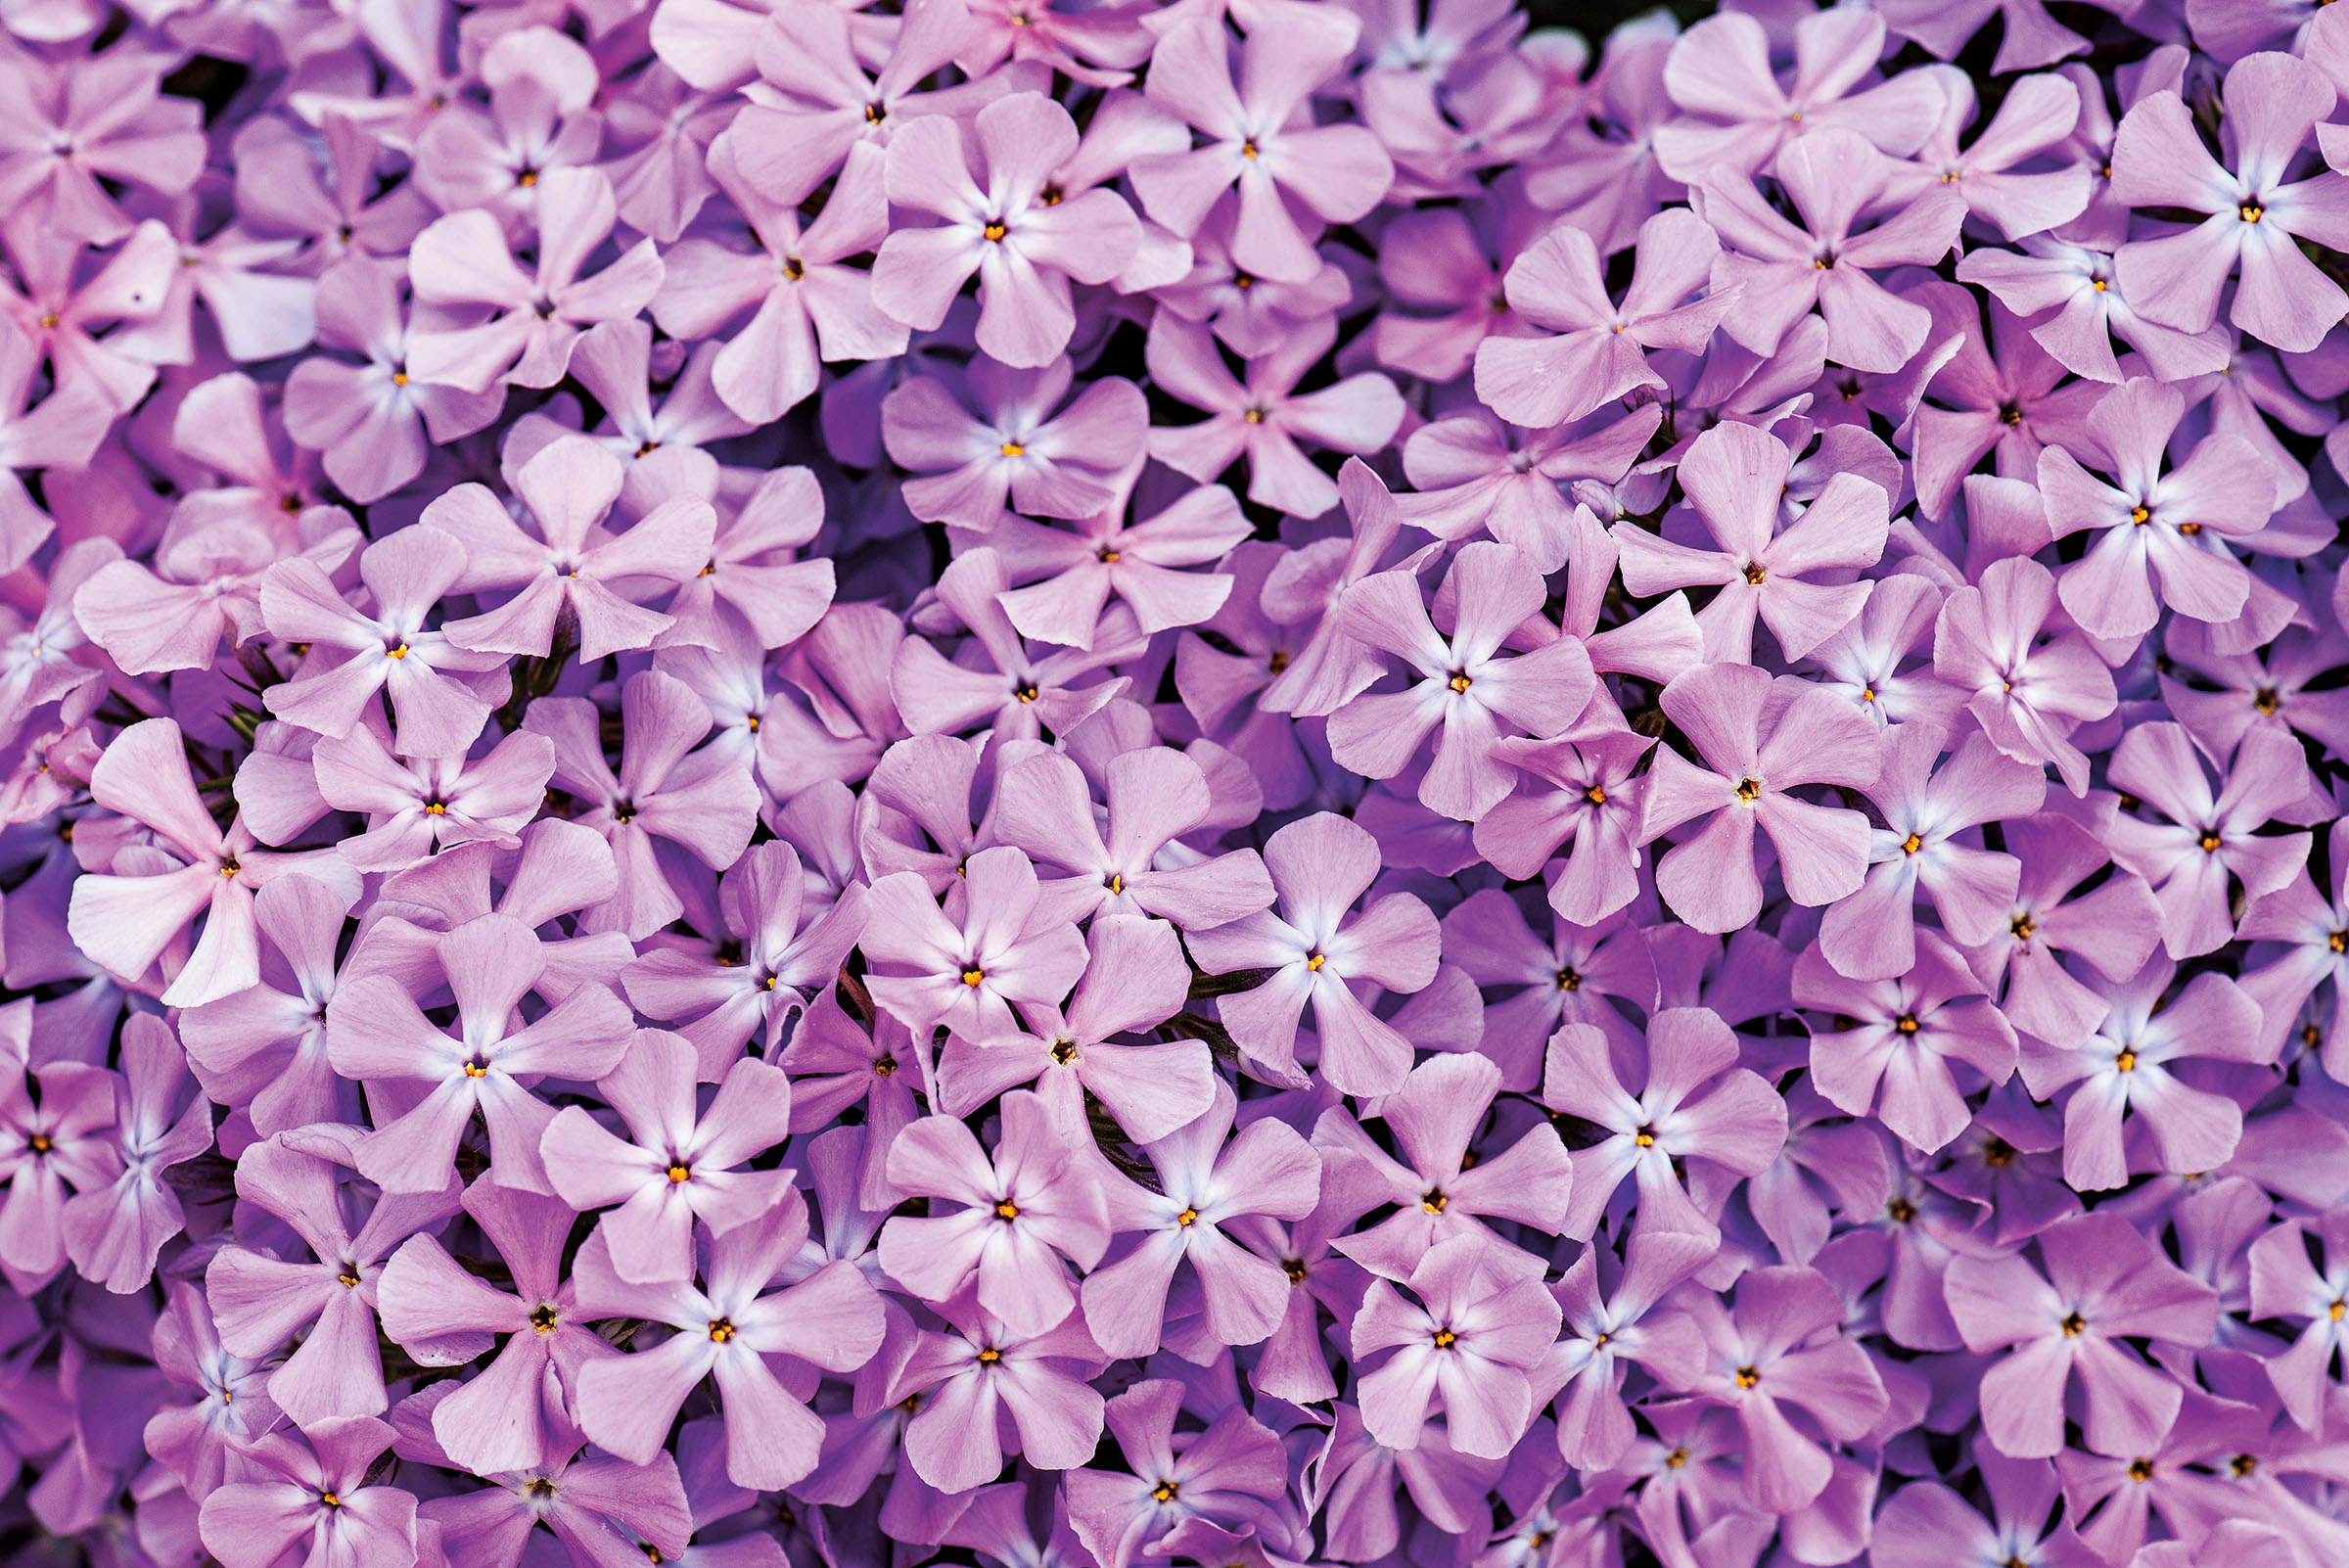 An overhead view of a large field of purple flowers